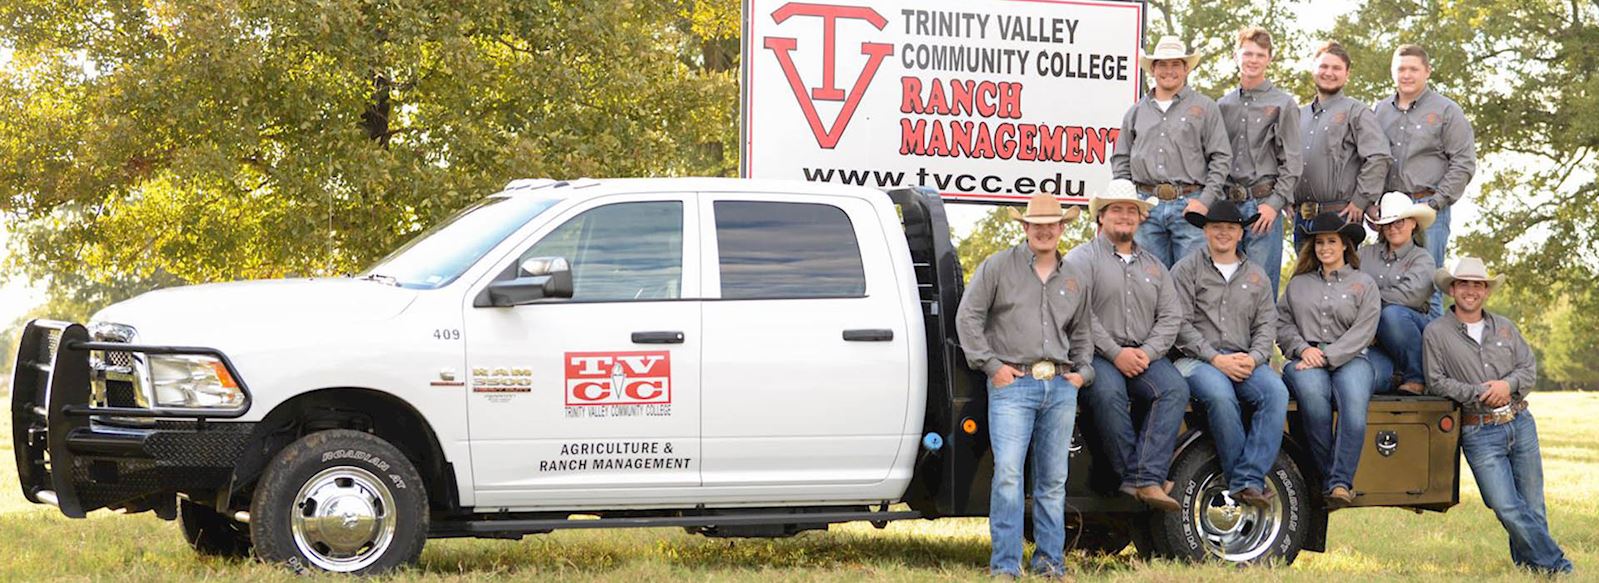 TVCC Ranch Management flatbed farm truck with students